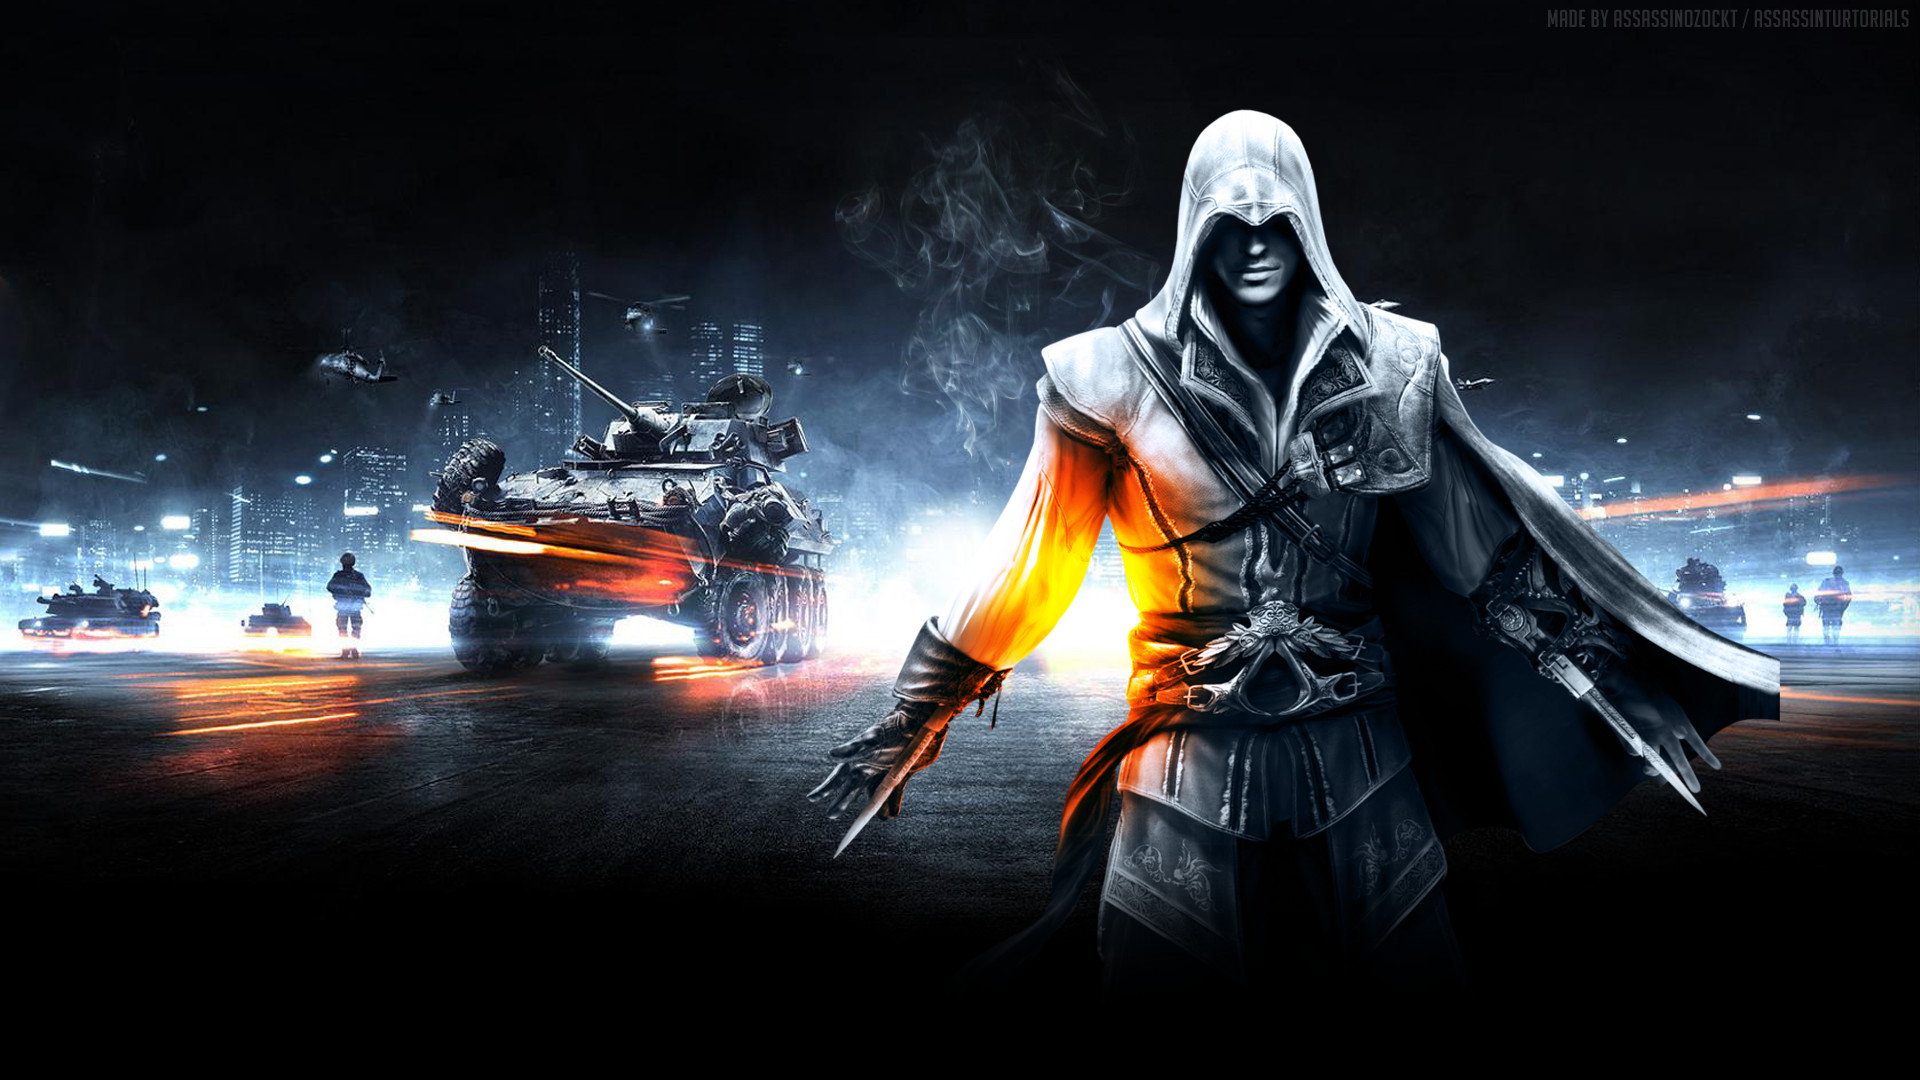 1920x1080 Gaming Backgrounds Pictures HD.